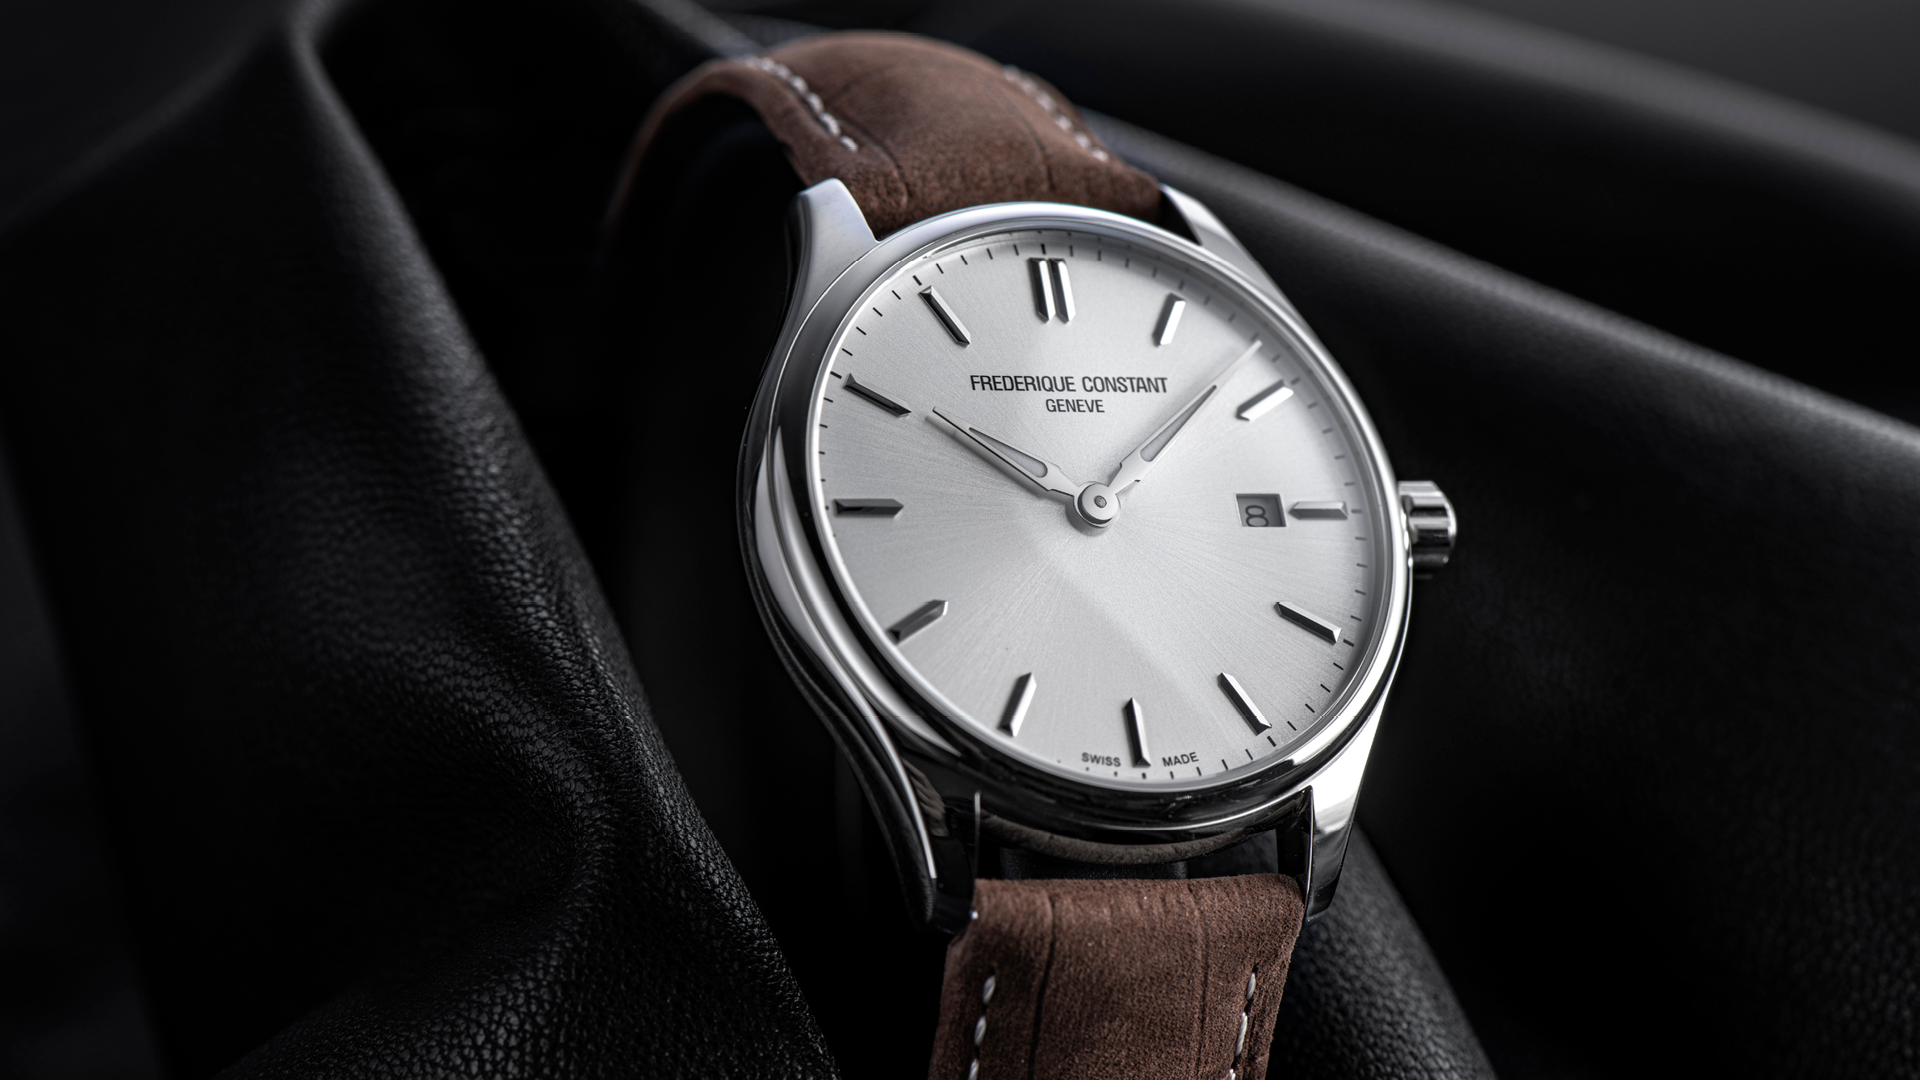 Classic Quartz watch for man. Quartz movement, silver dial, stainless-steel case, date window and brown leather strap